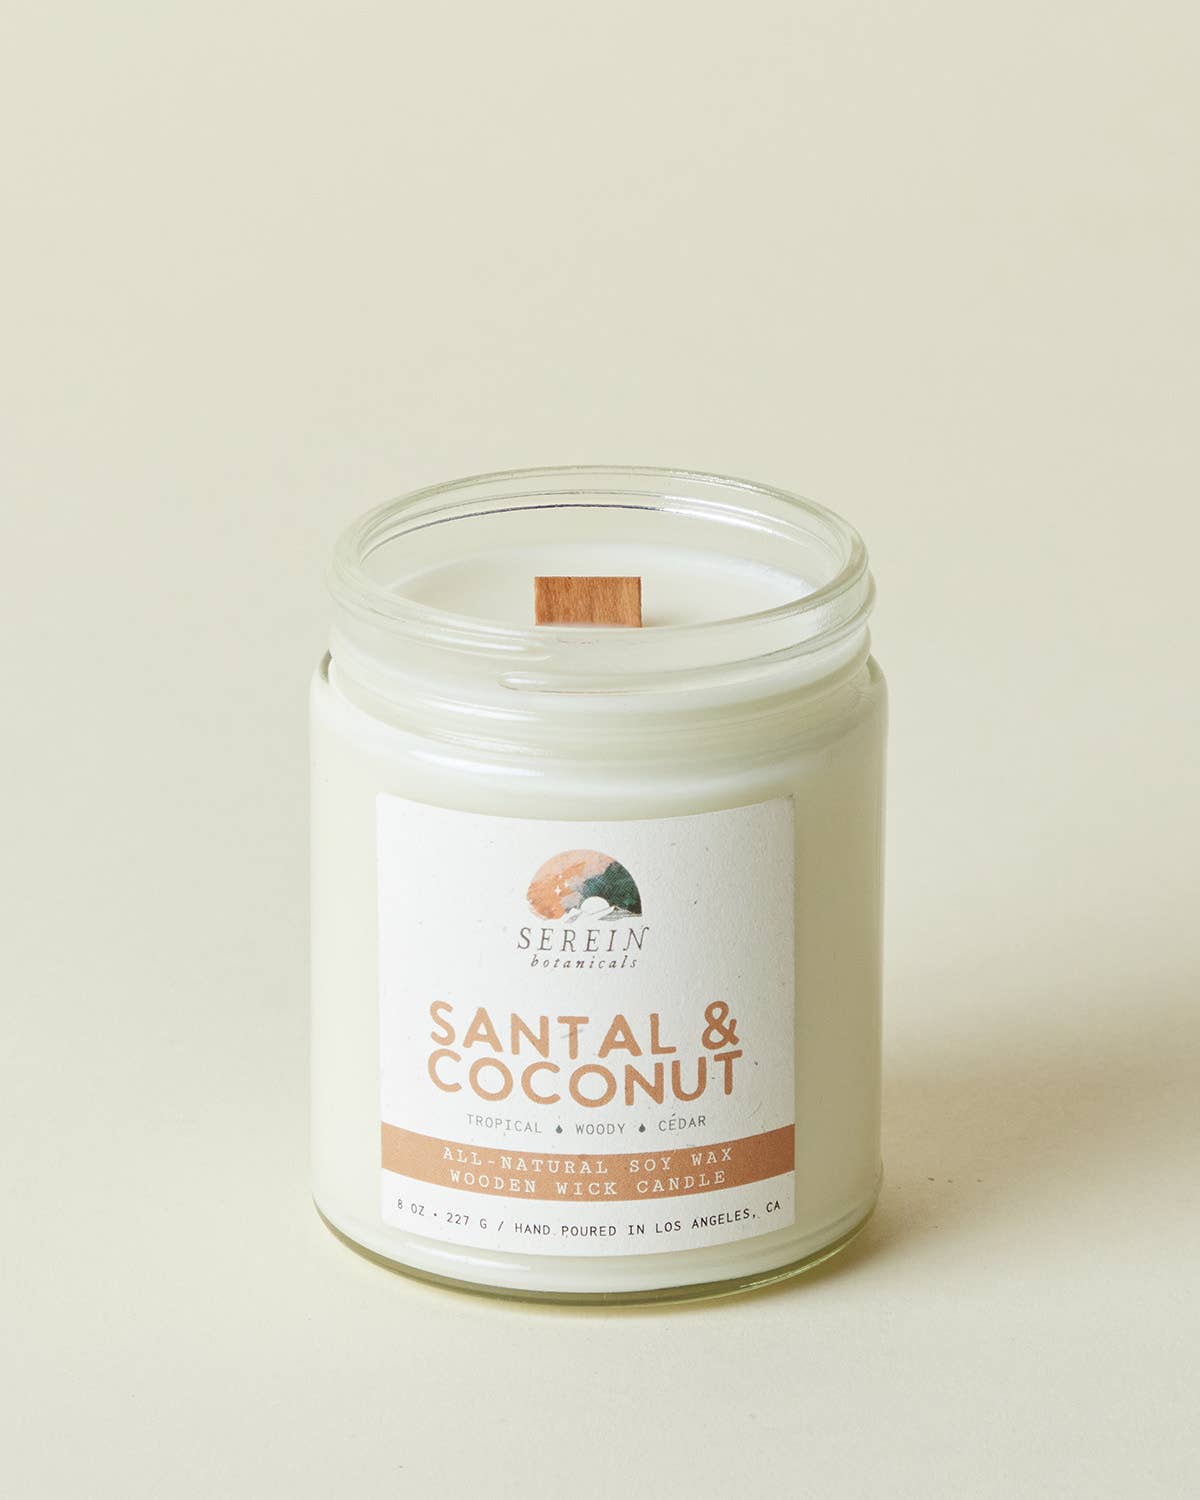 Santal & Coconut soy wooden wick candle 